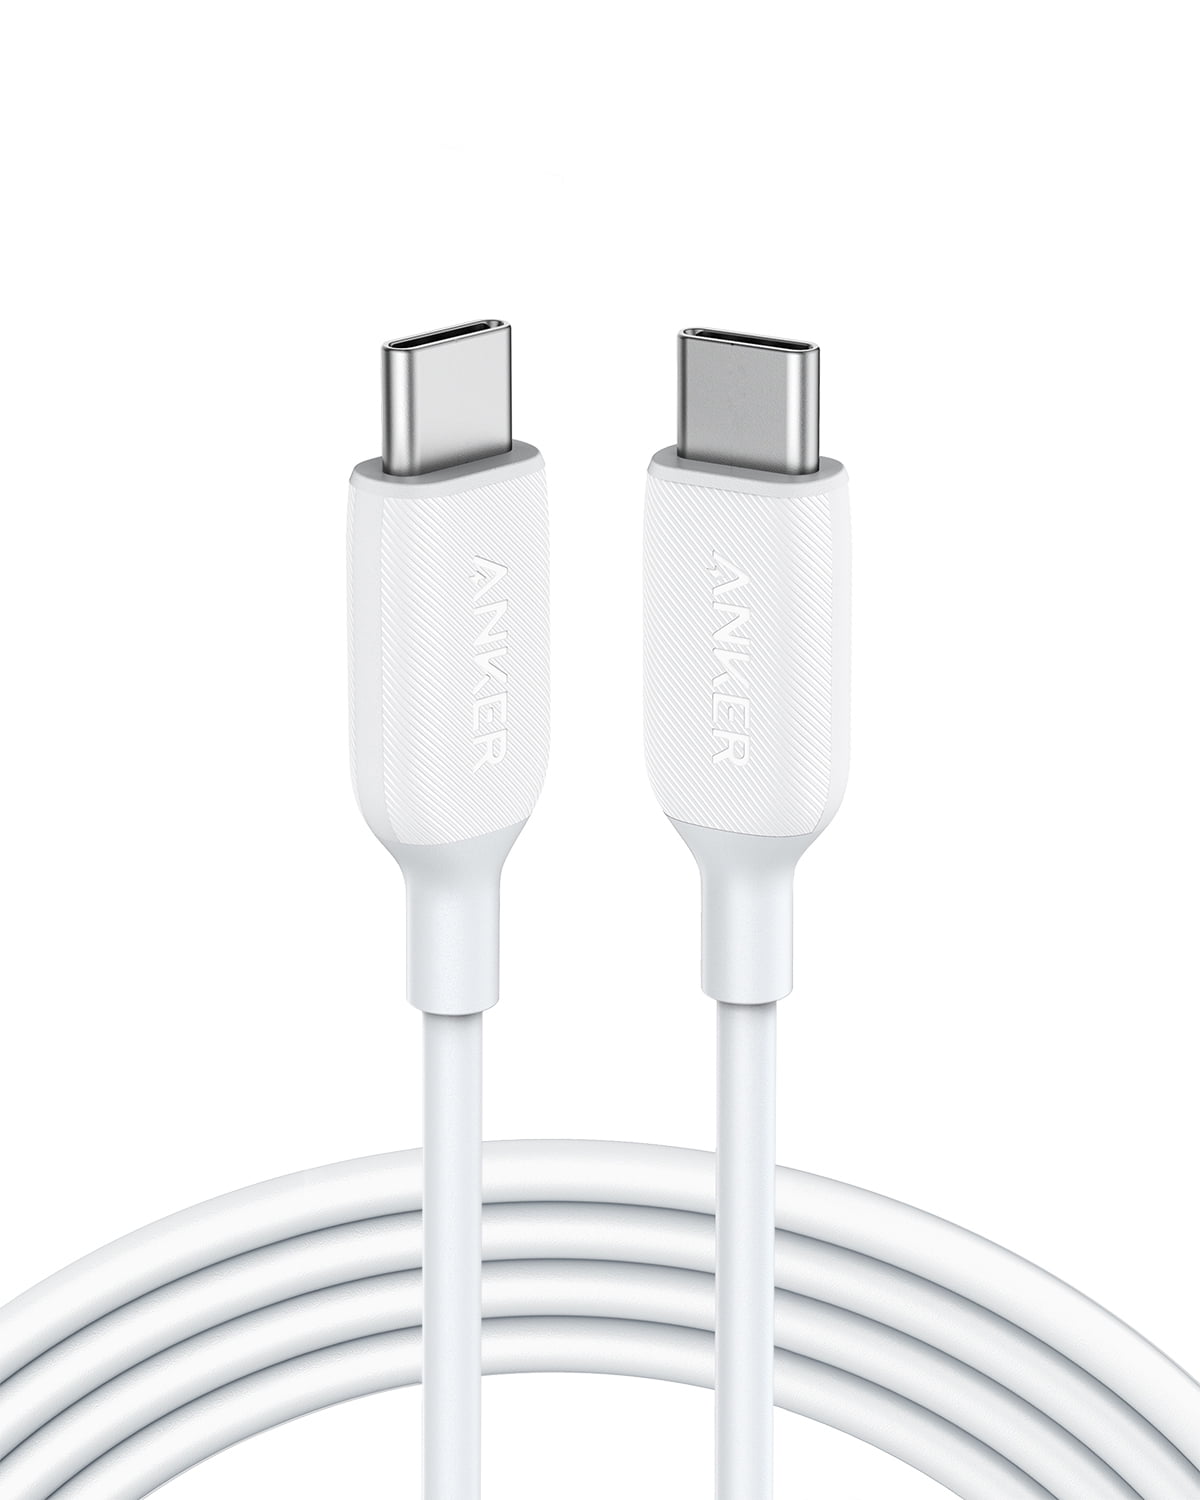 Anker Powerline III USB-C to USB-C Cable 2.0 (60W/10ft) , USB C Charger Cable for MacBook Pro, iPad, Samsung Galaxy, Pixel, and More